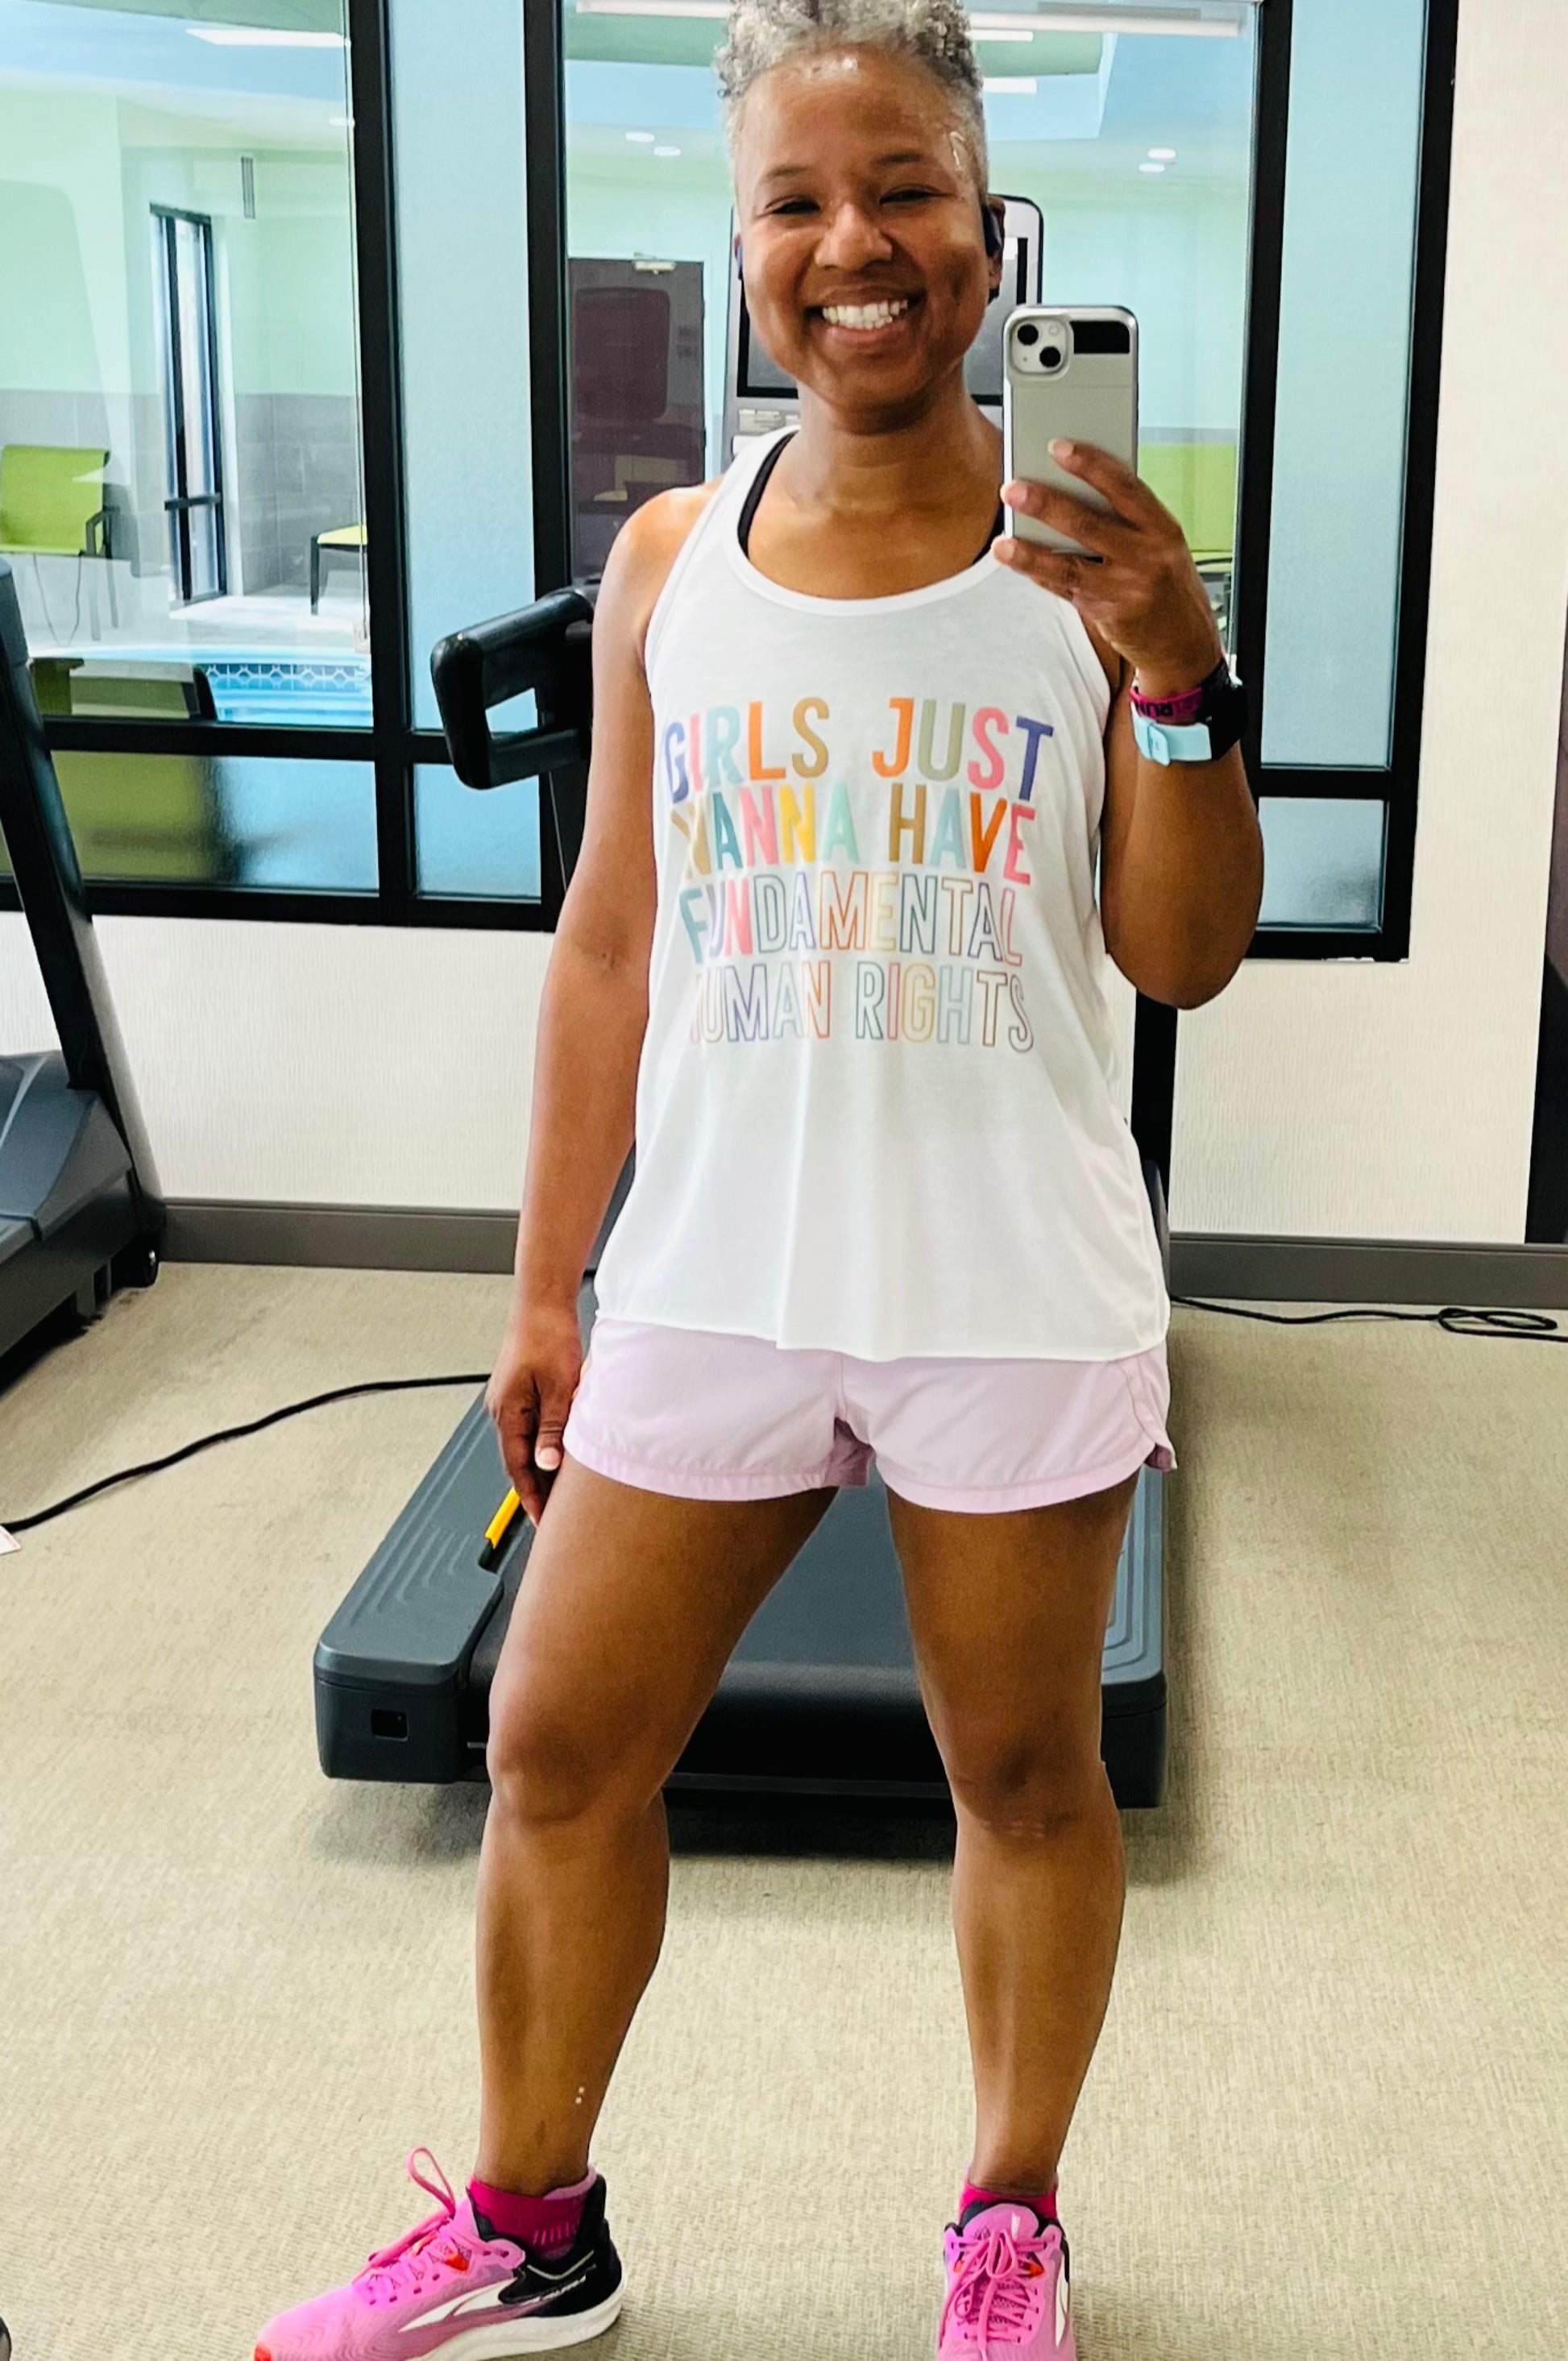 Soft Workout tank top that says Girls Just Wanna Have Fundamental Human Rights 